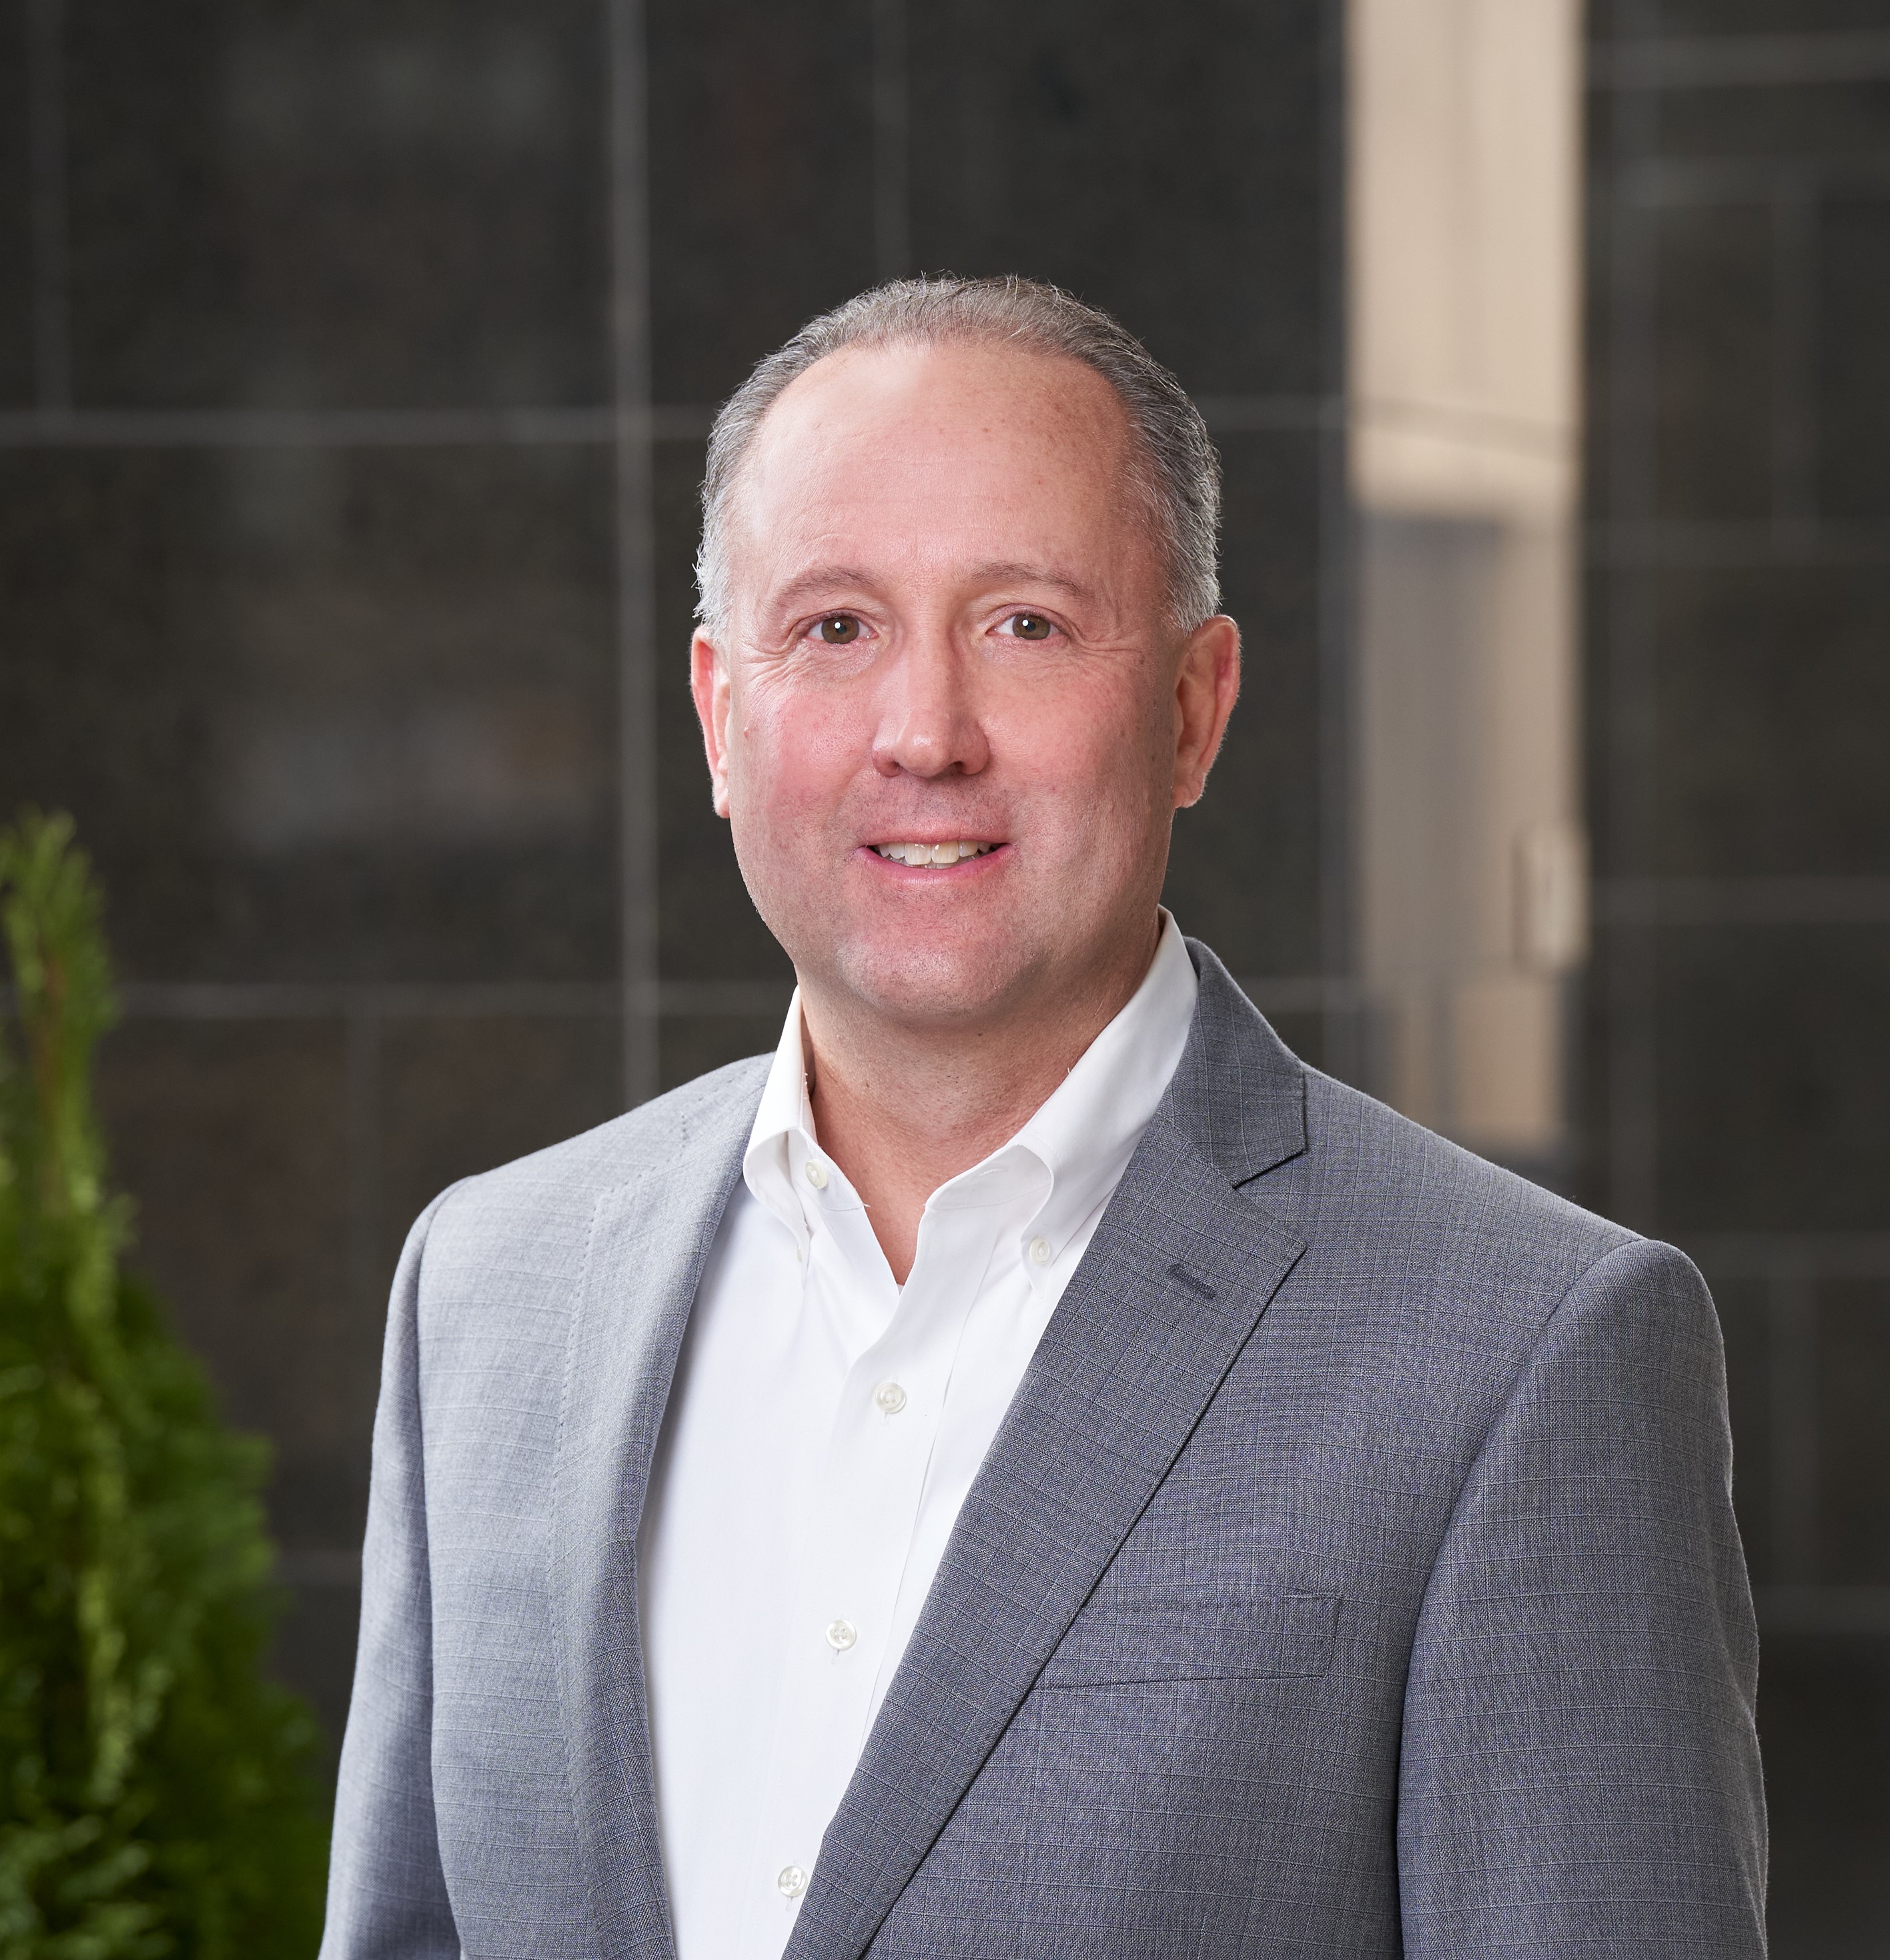 Brian Engle, Executive Vice President of Operations, Partner, Brightview Senior Living